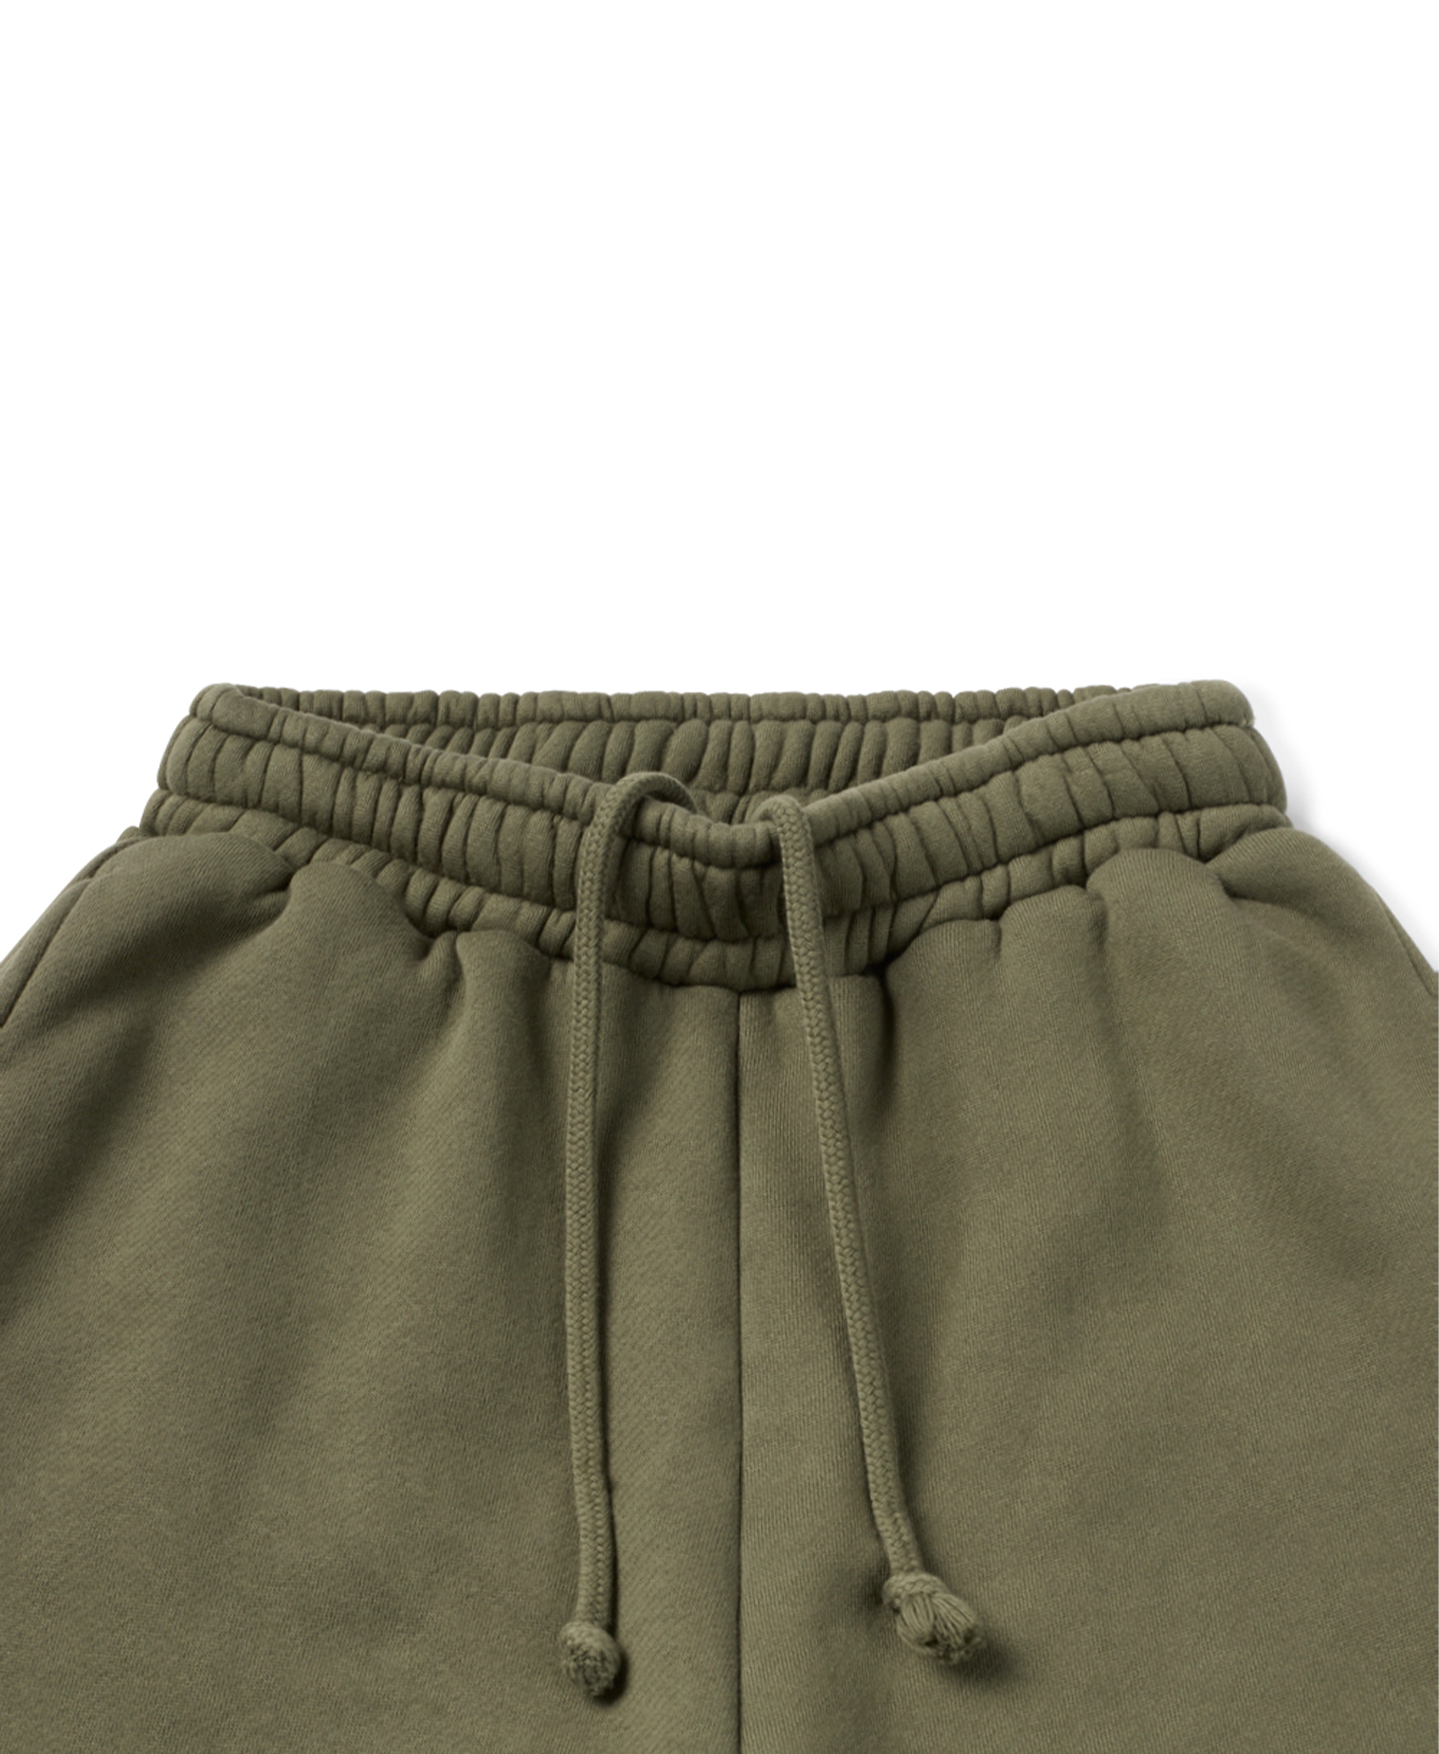 450 GSM 'Army Olive' Straight-leg Pants